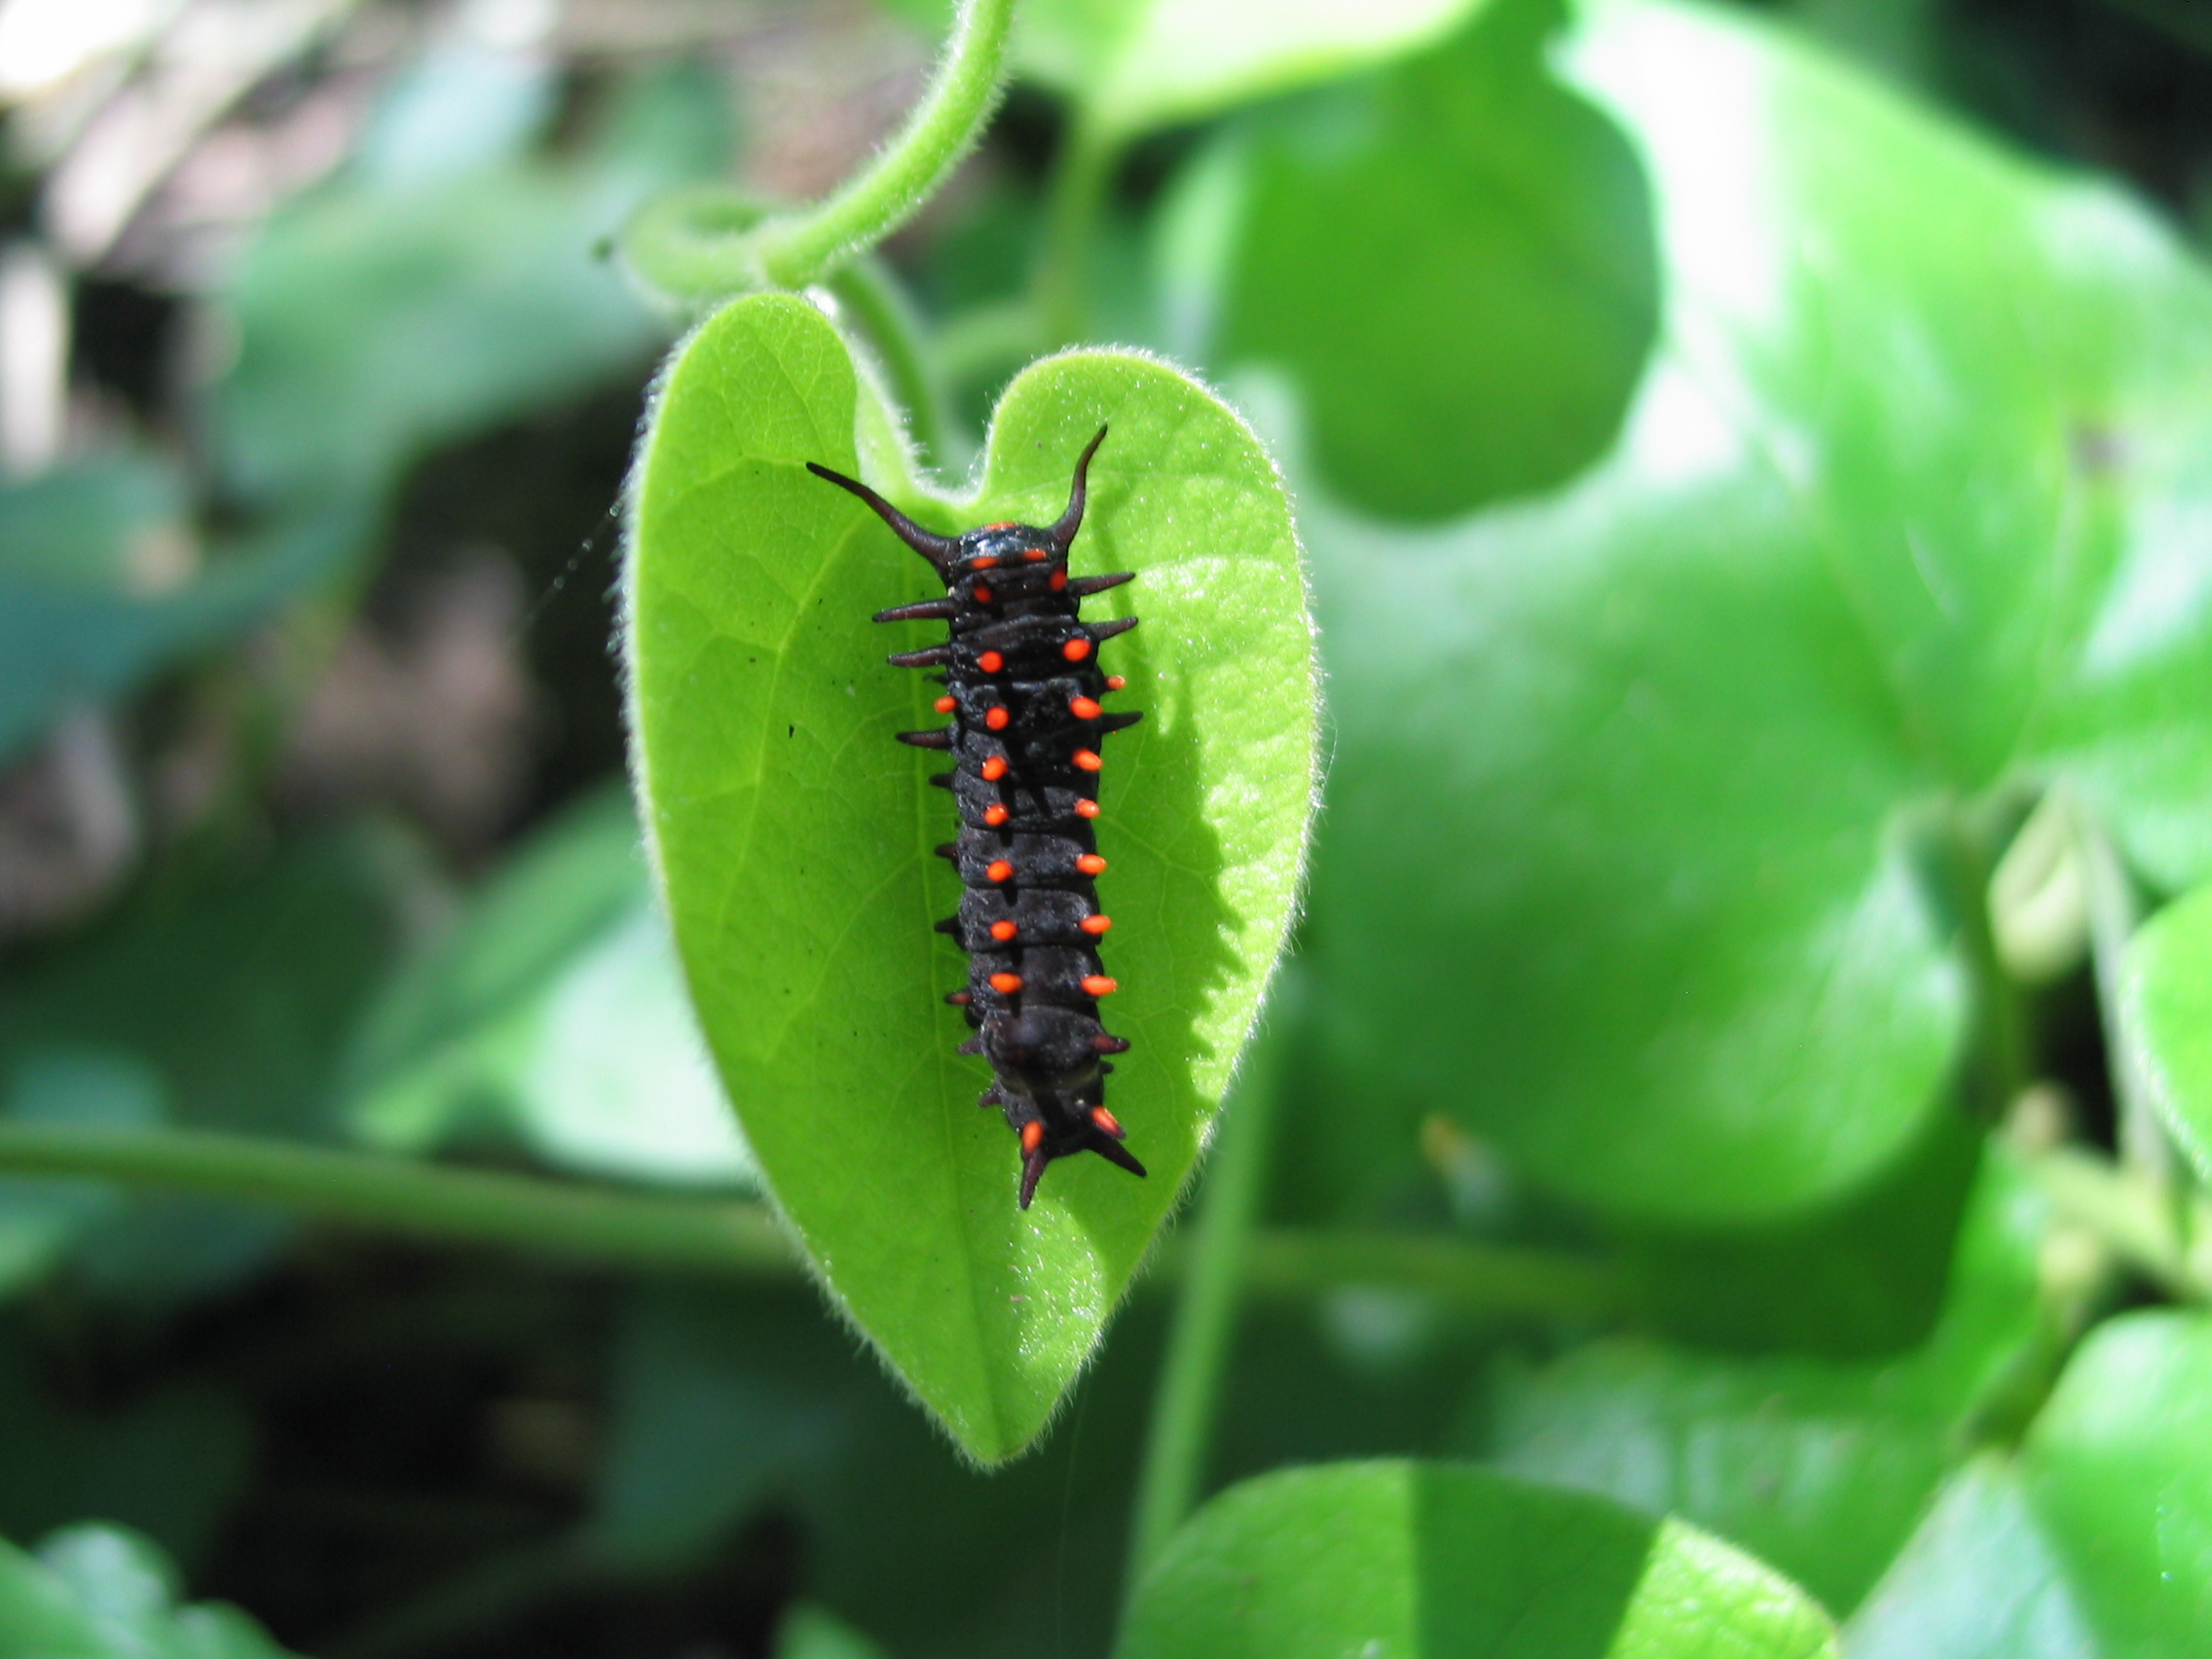 Image of California pipevine with pipevine swallowtail larva on its leaf.